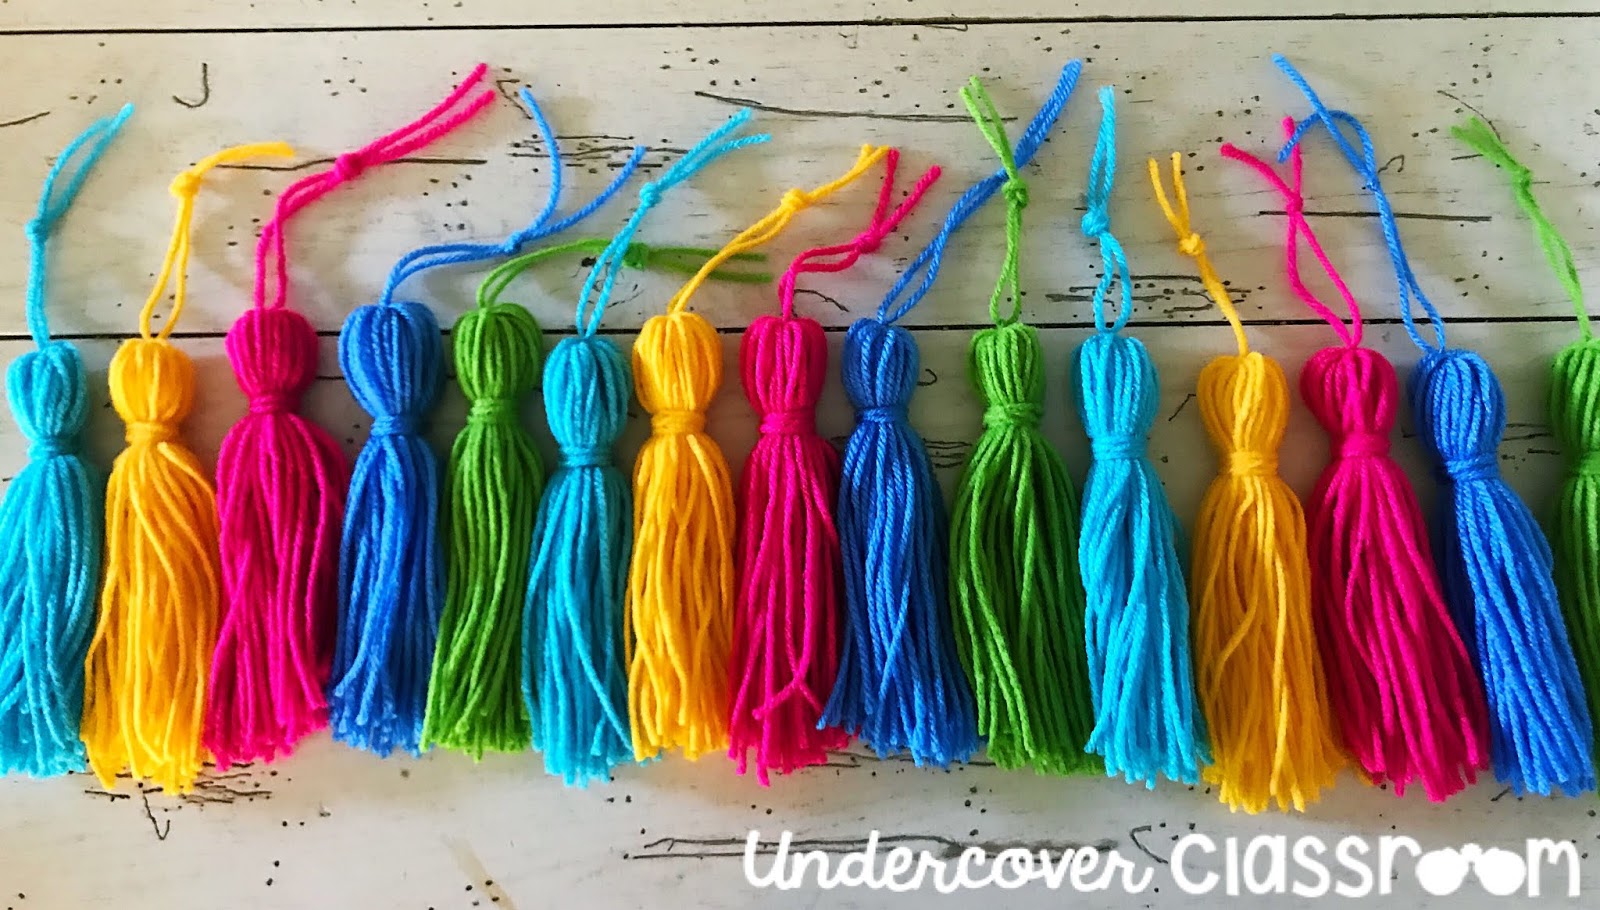 Spruce up your classroom with this DIY tassel garland. Follow these easy steps to make yarn tassels. It's easier than you think. Your bulletin boards will be looking jazzy in no time!